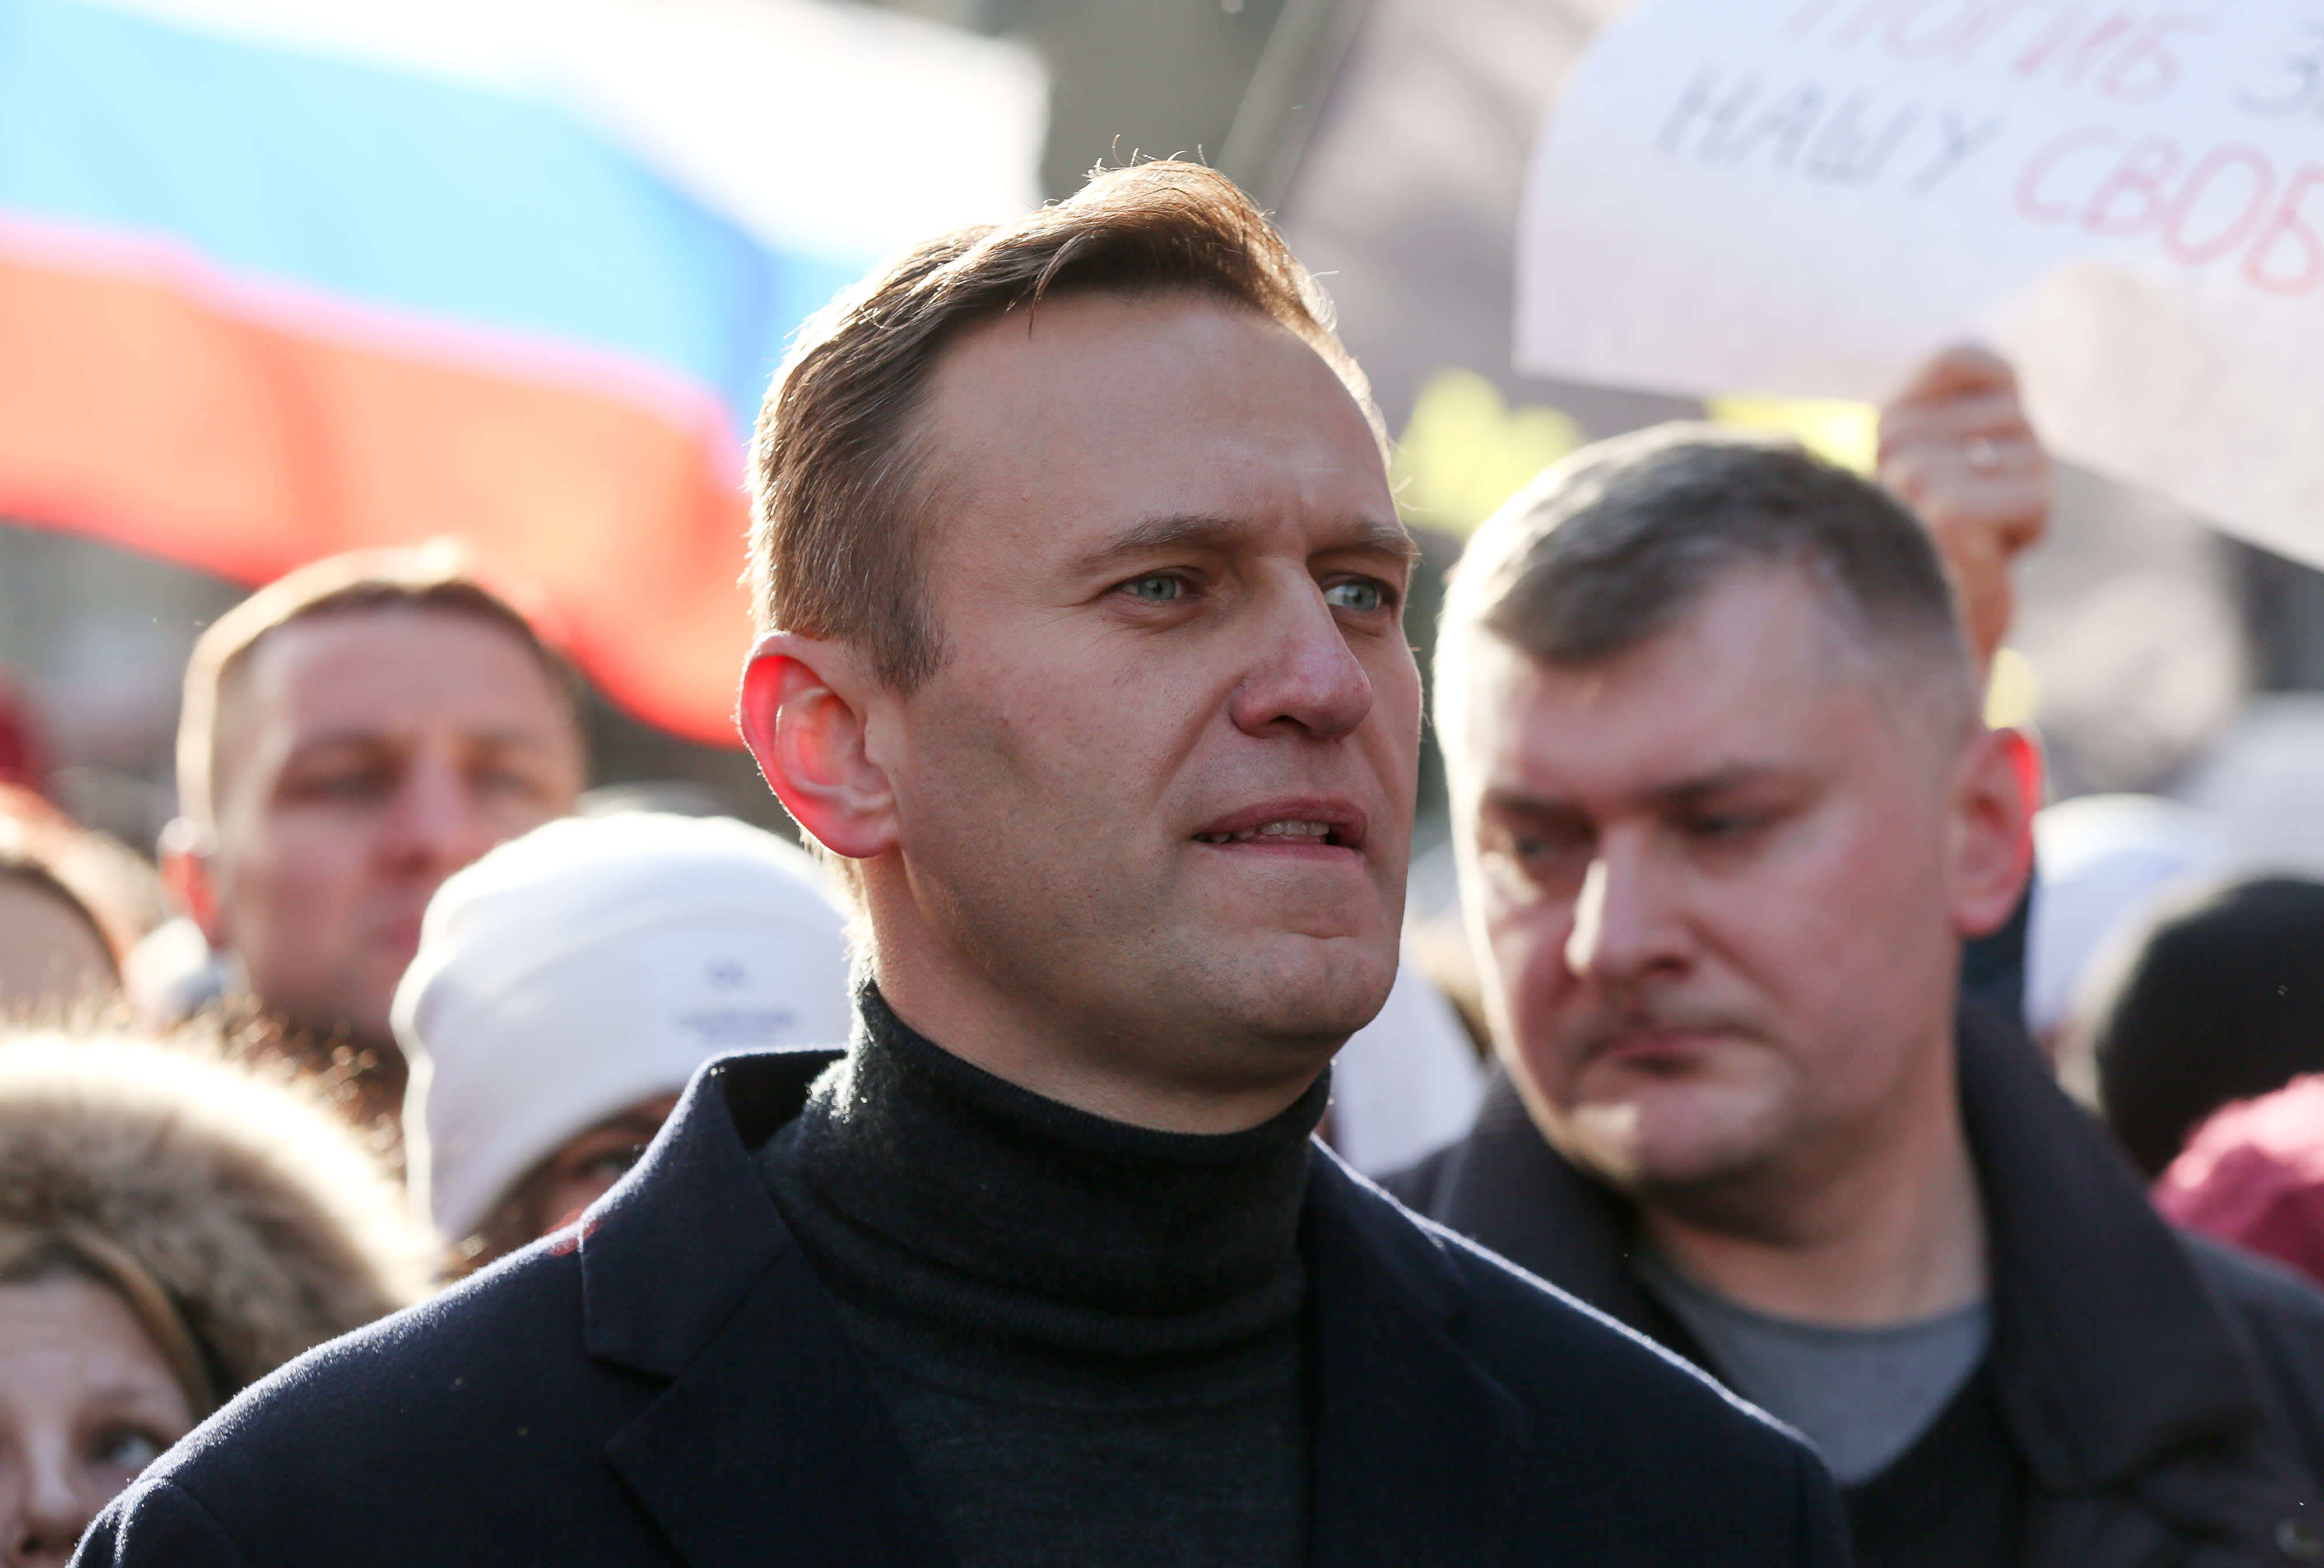 Russian opposition leader Alexei Navalny has been detained at a Moscow airport